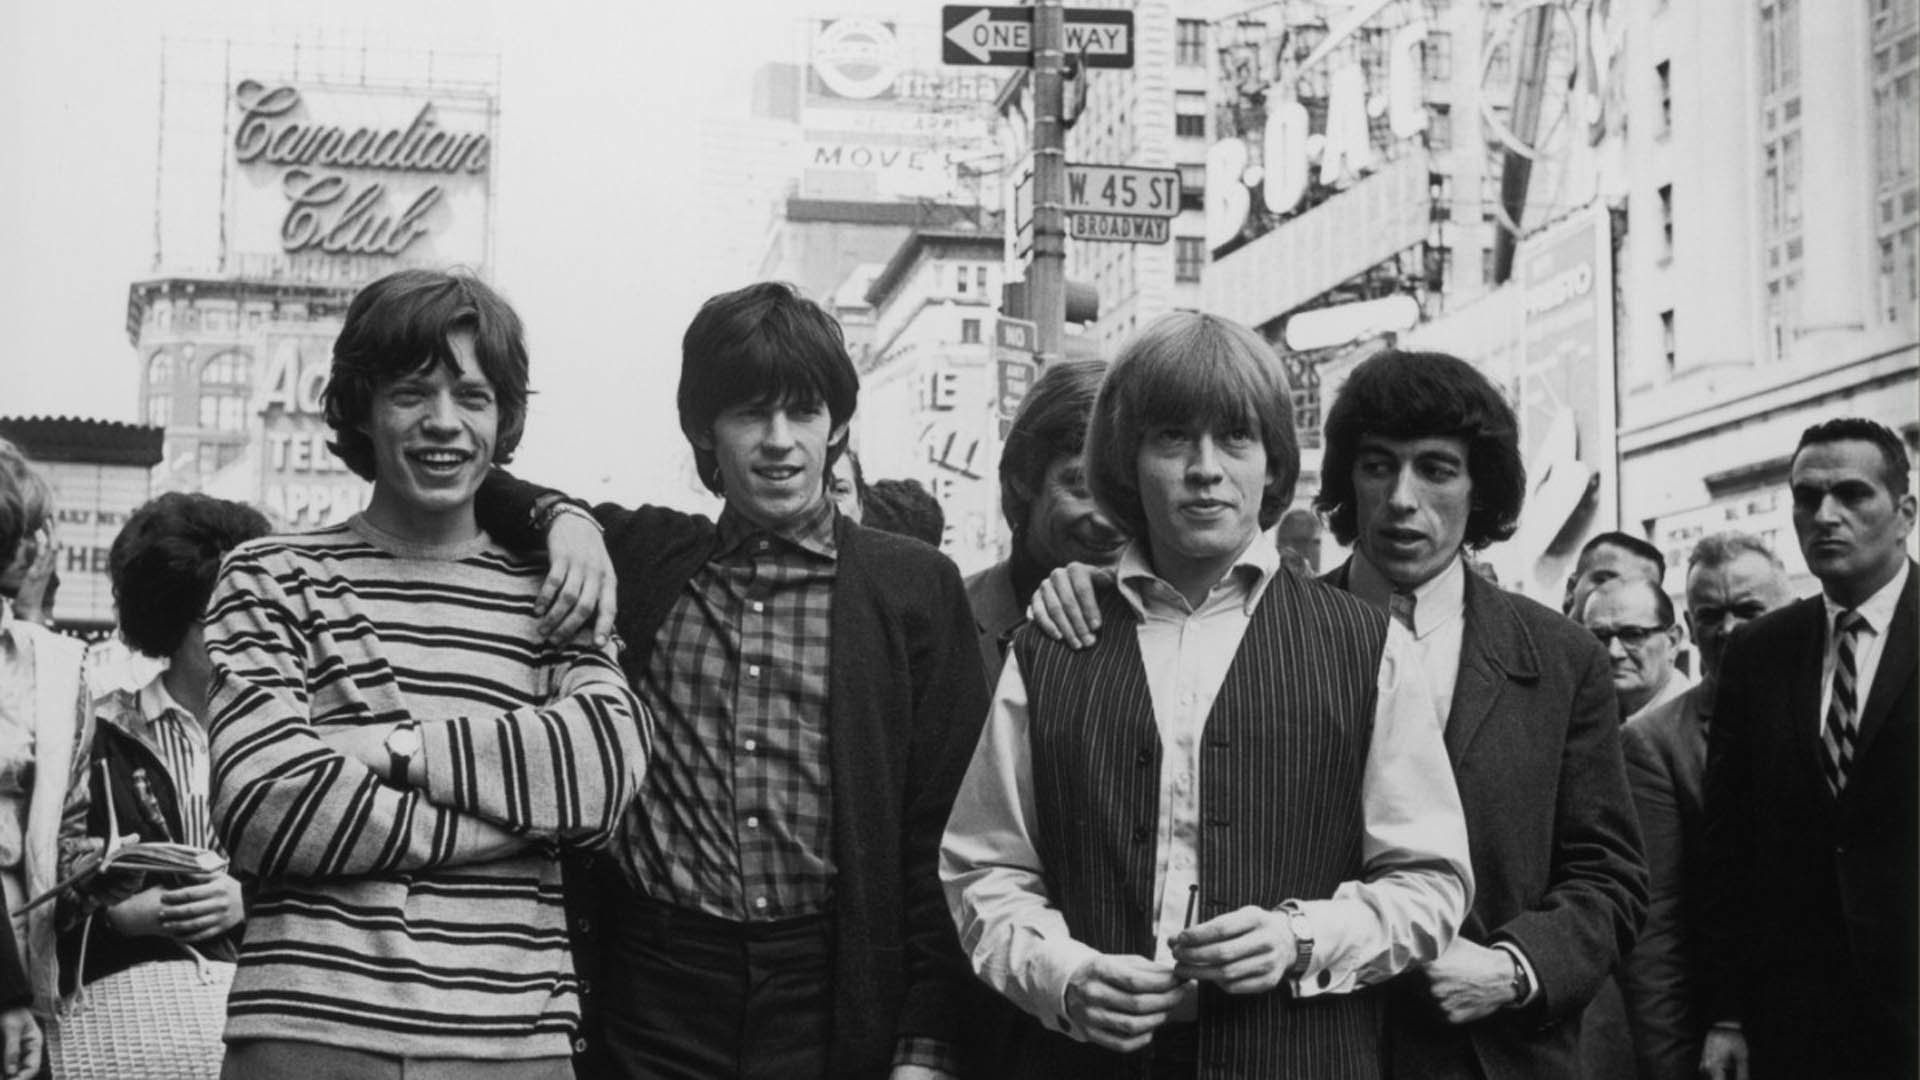 Band wallpapers, Top Free, Rolling Stones band, 1920x1080 Full HD Desktop